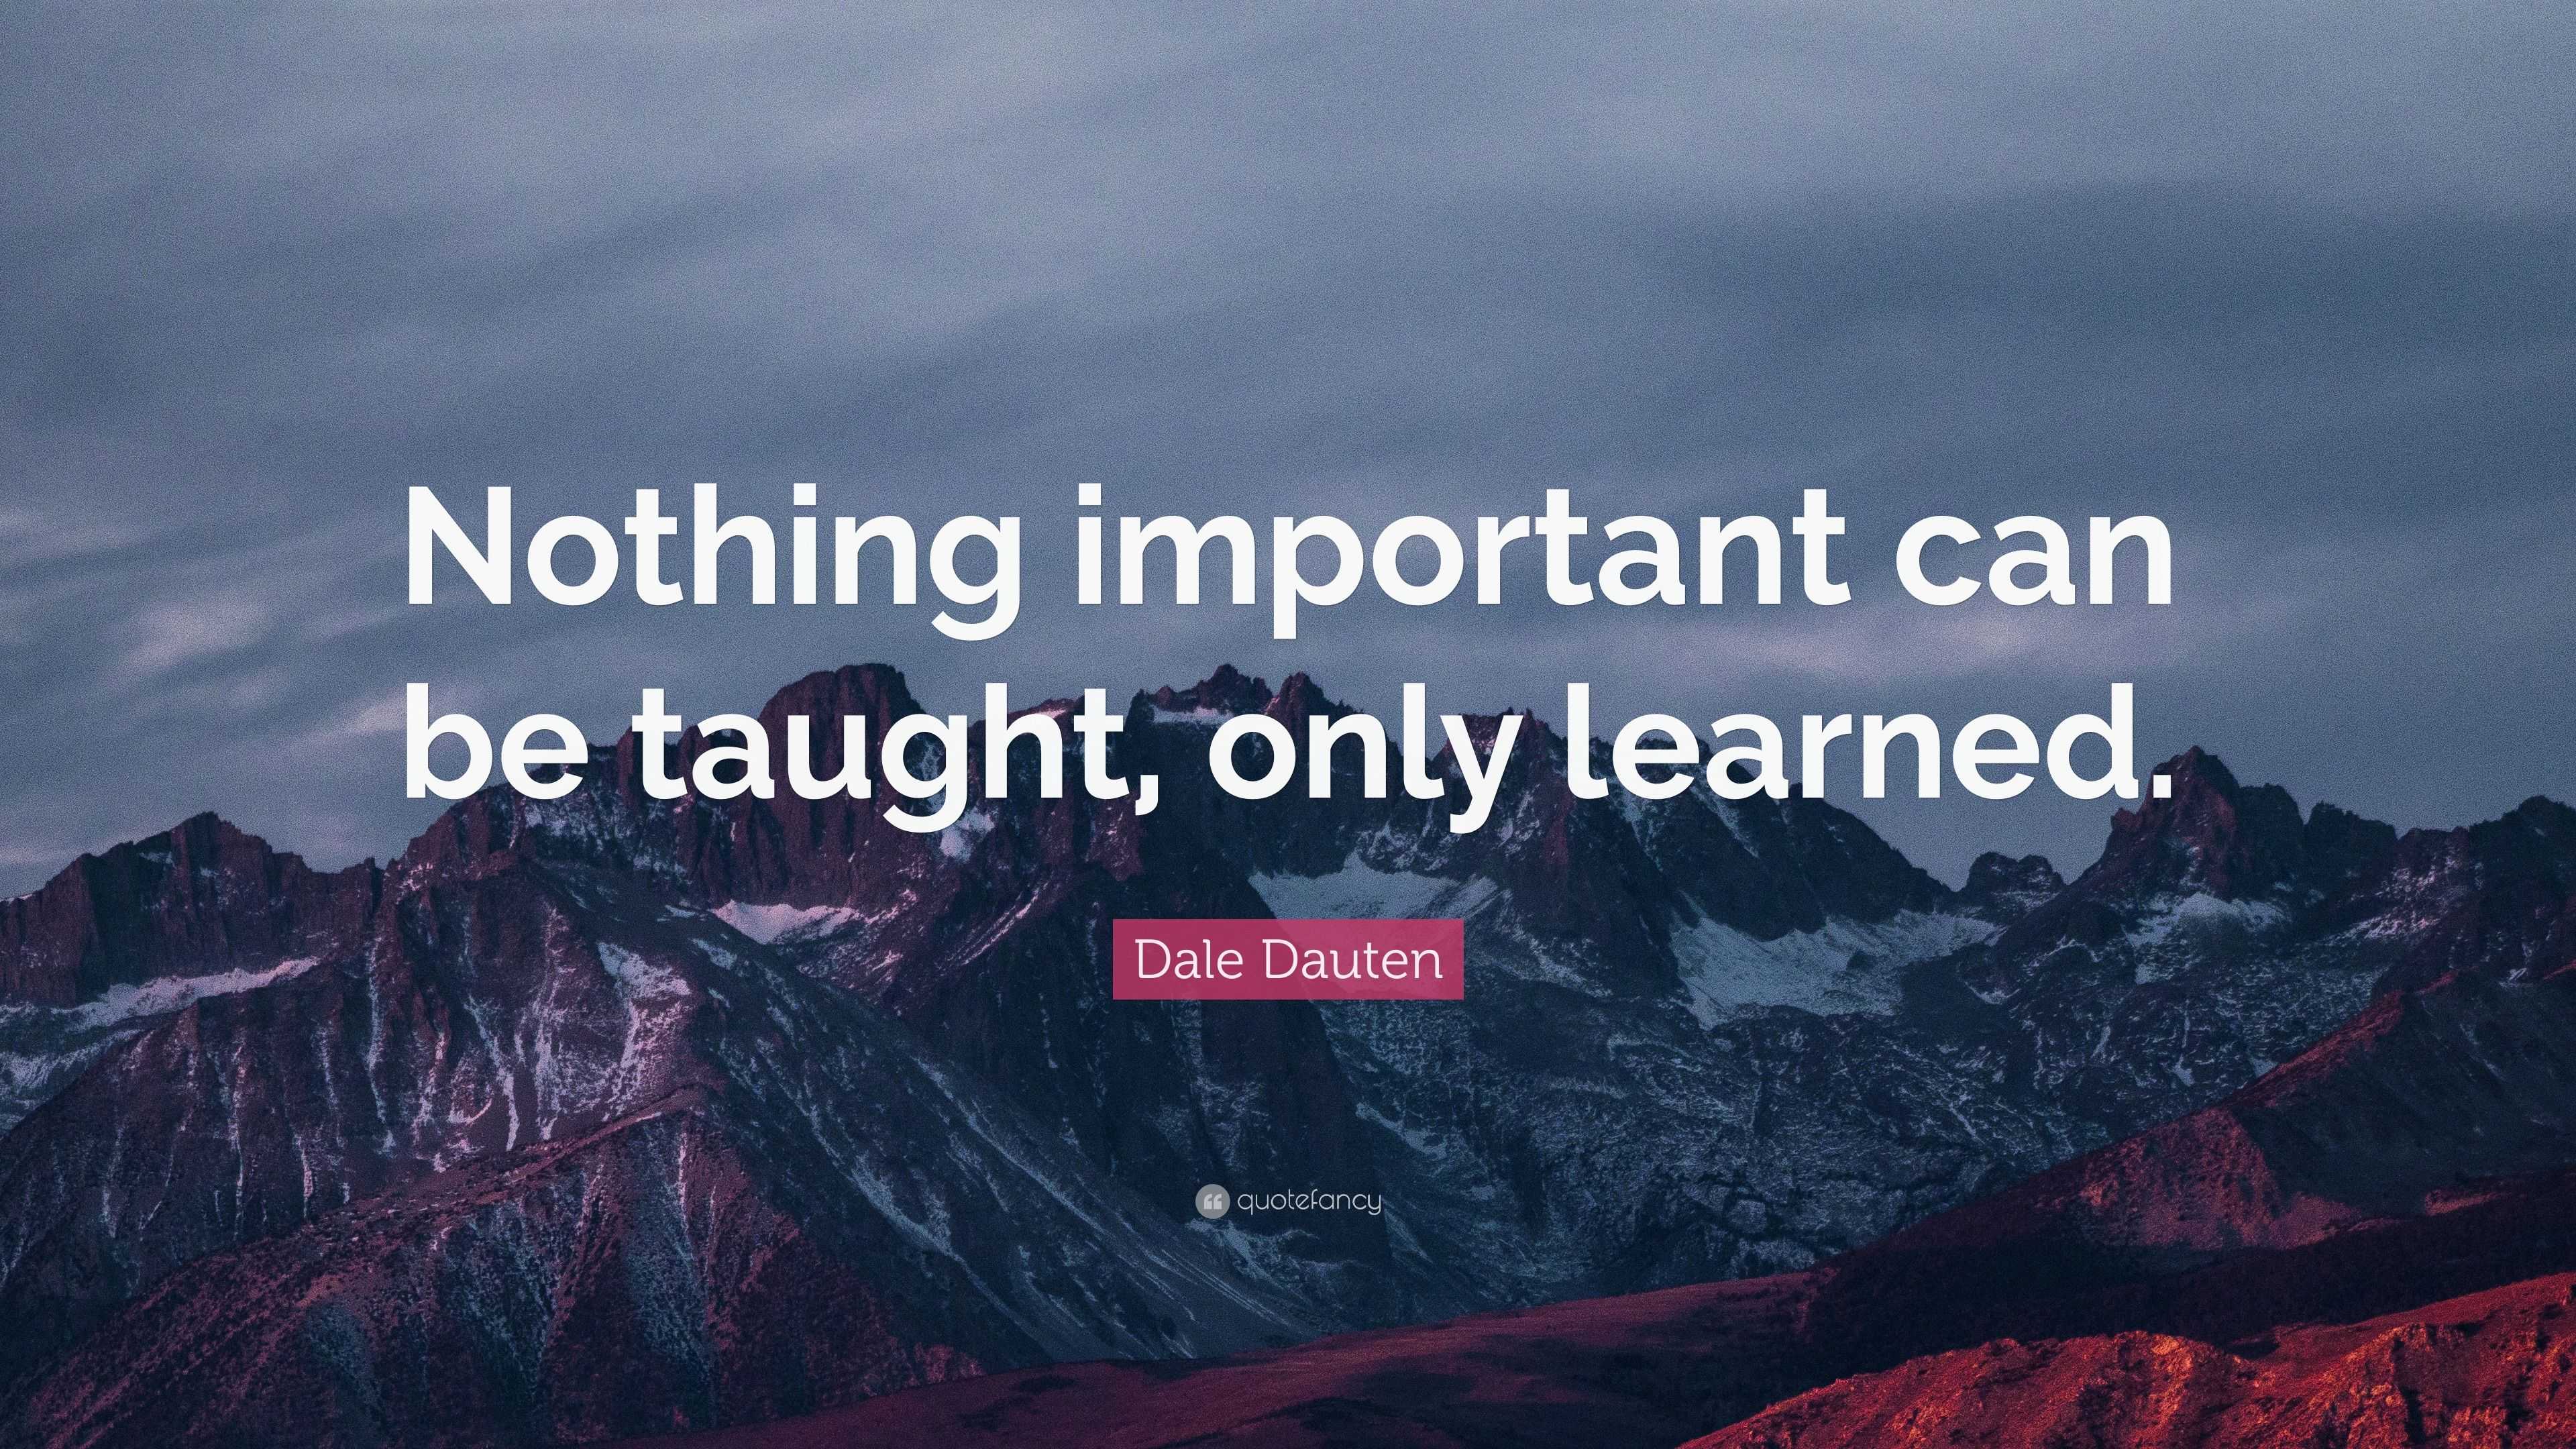 Dale Dauten Quote: “Nothing important can be taught, only learned.”